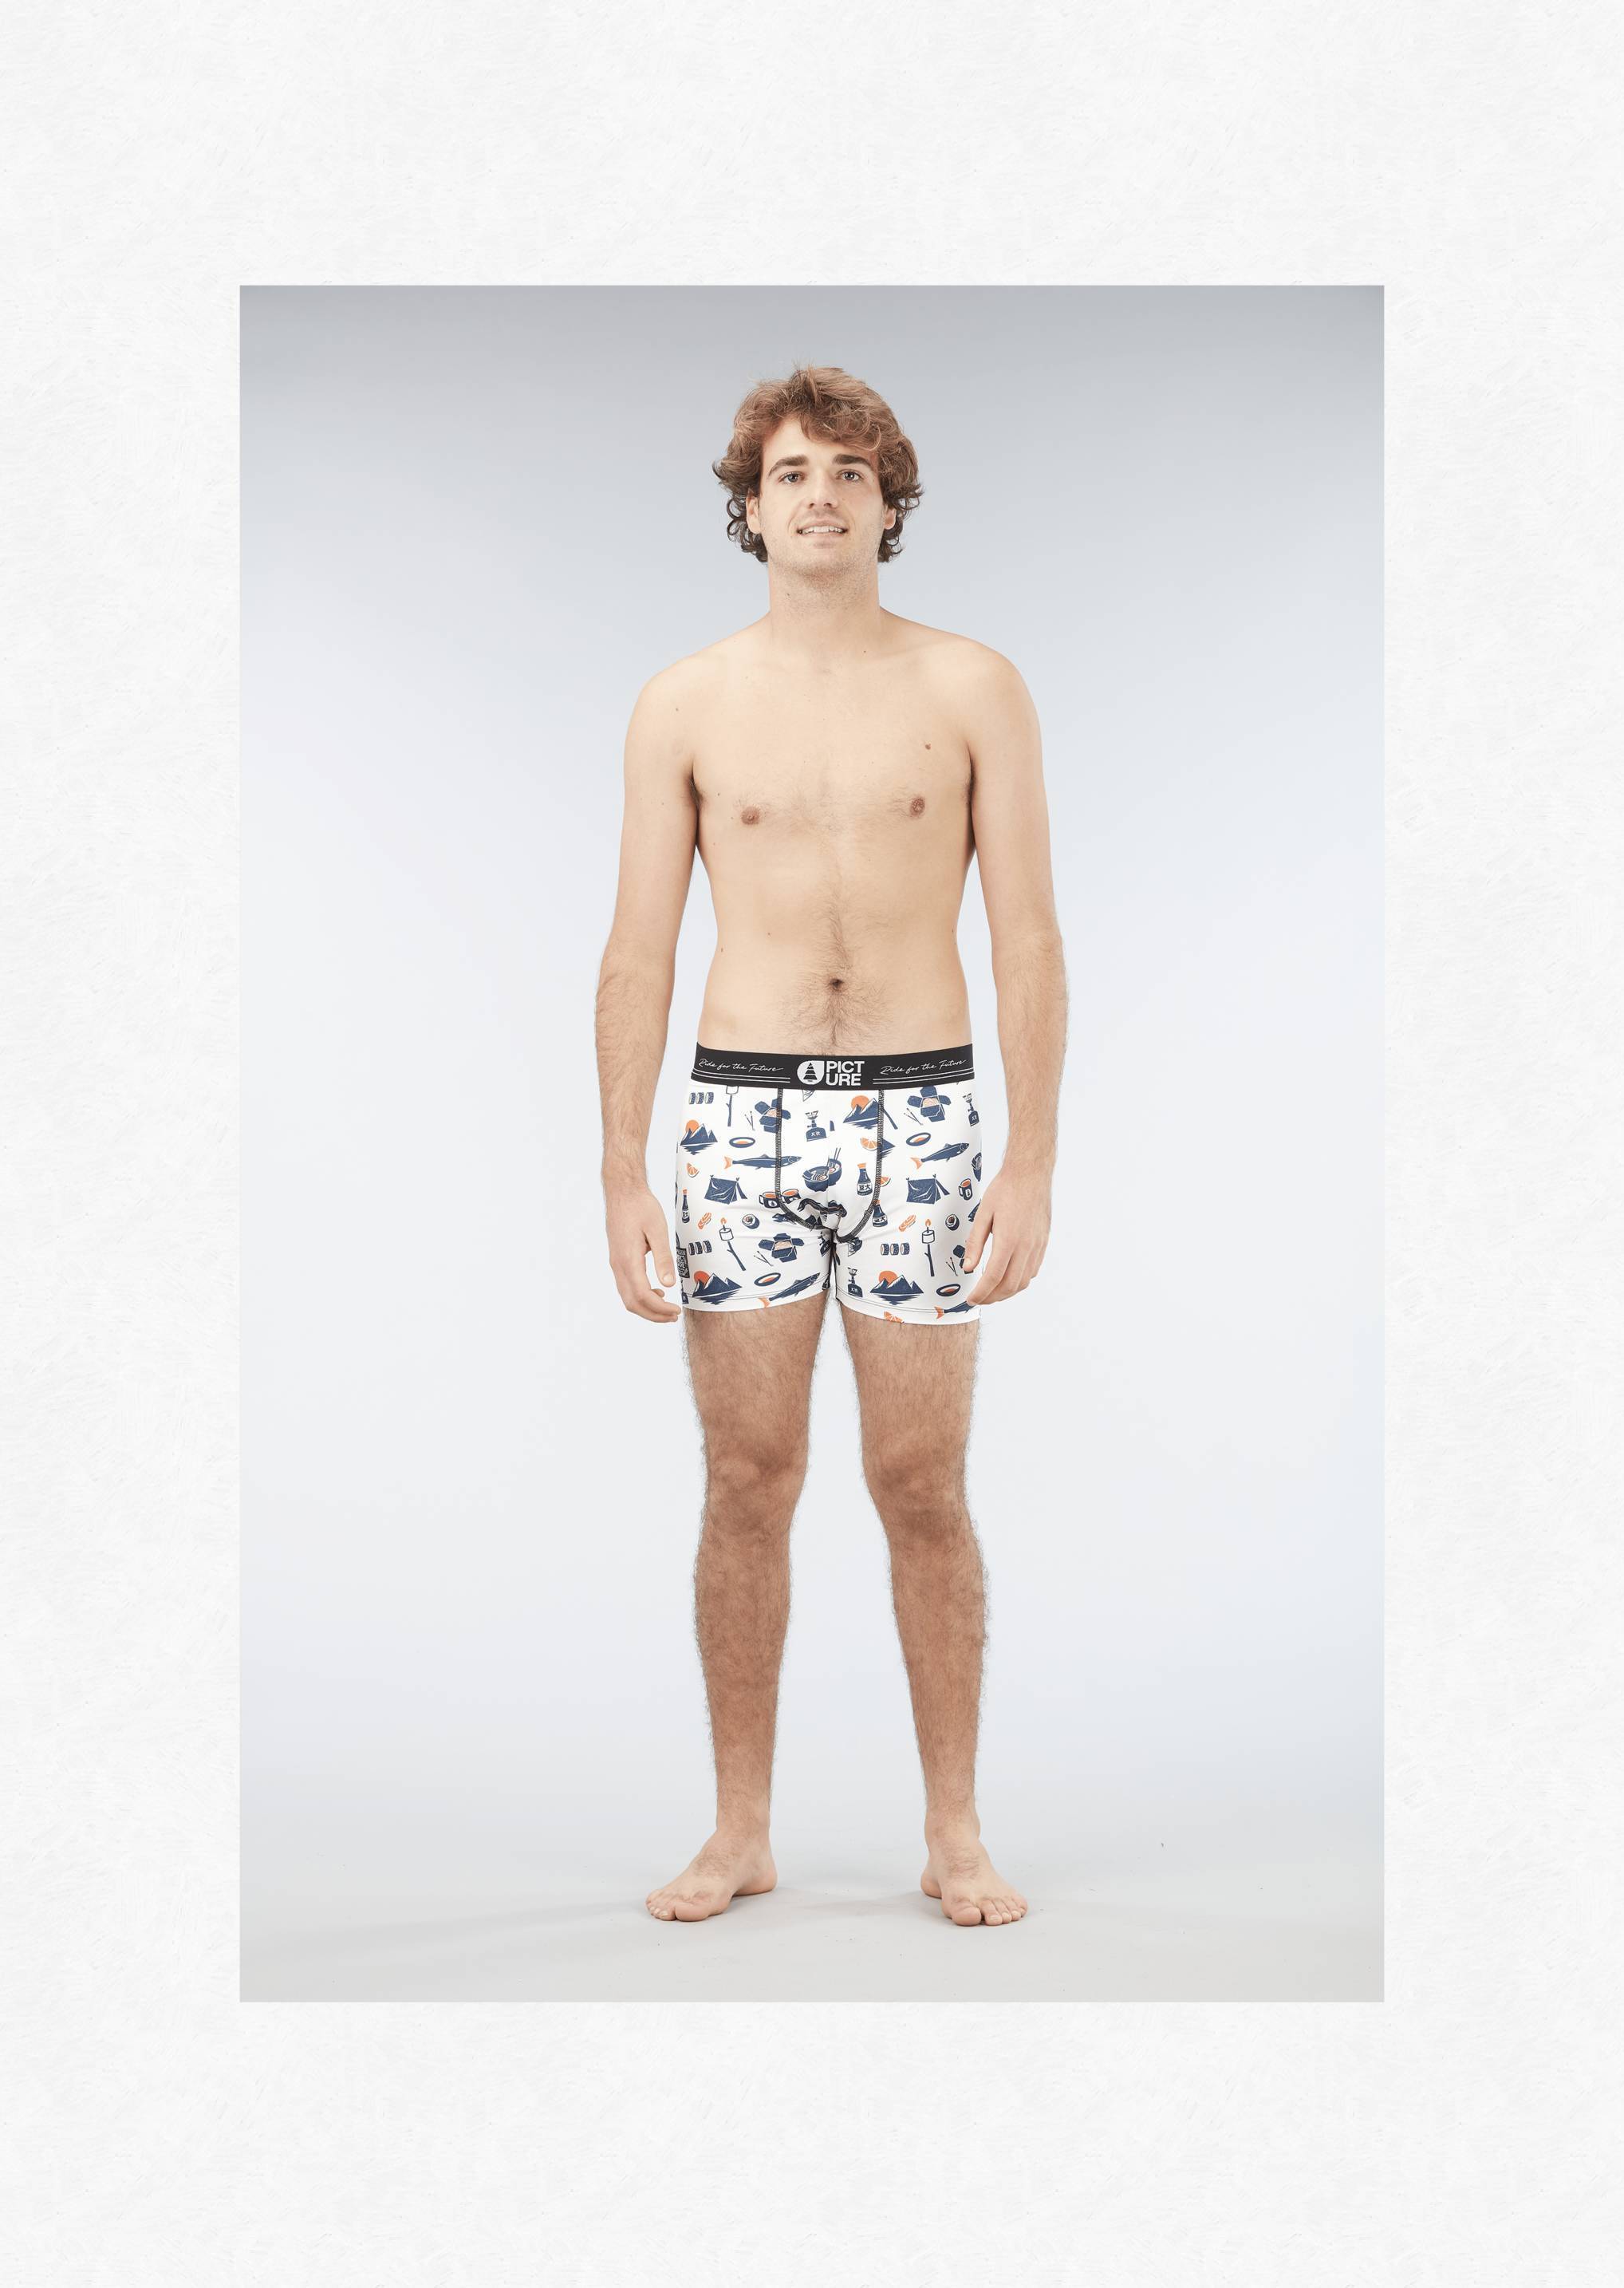 Picture Organic Men's Underwear - Recycled Polyester, Fooding / XL